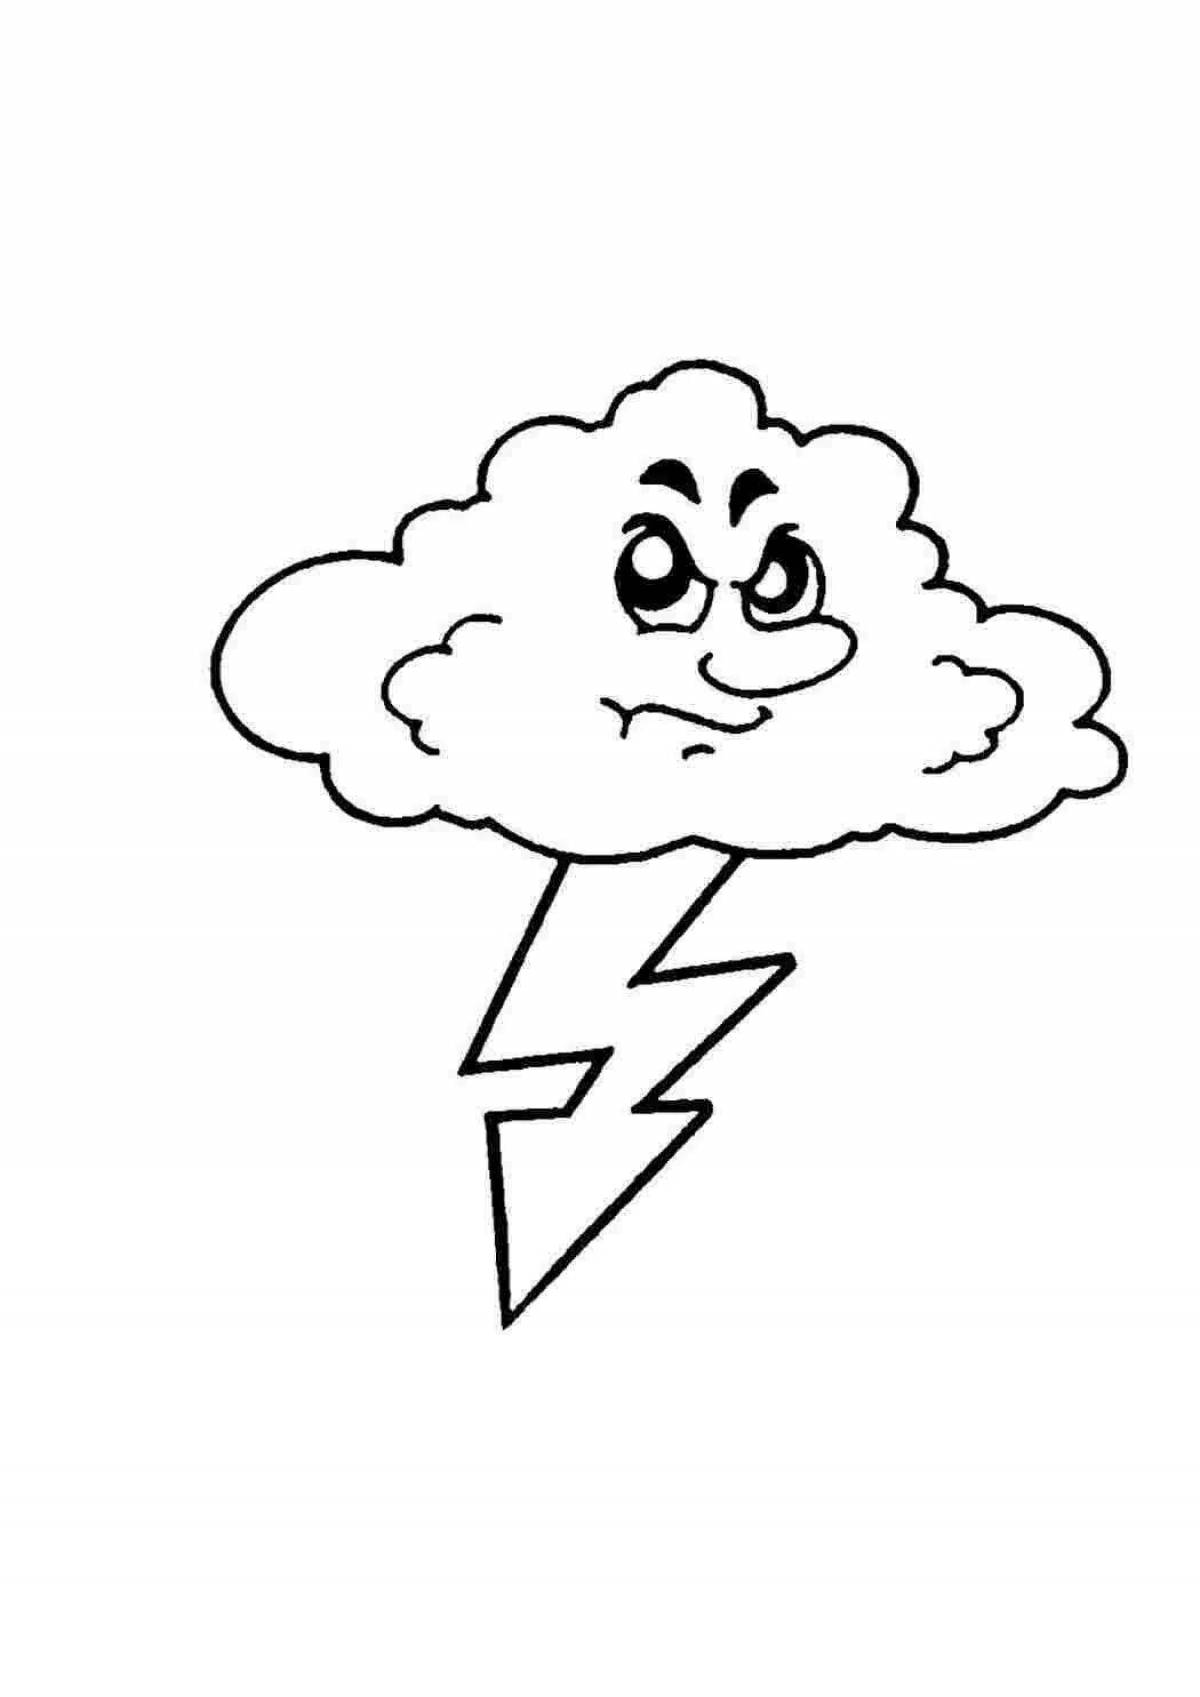 Colorful storm coloring page for kids